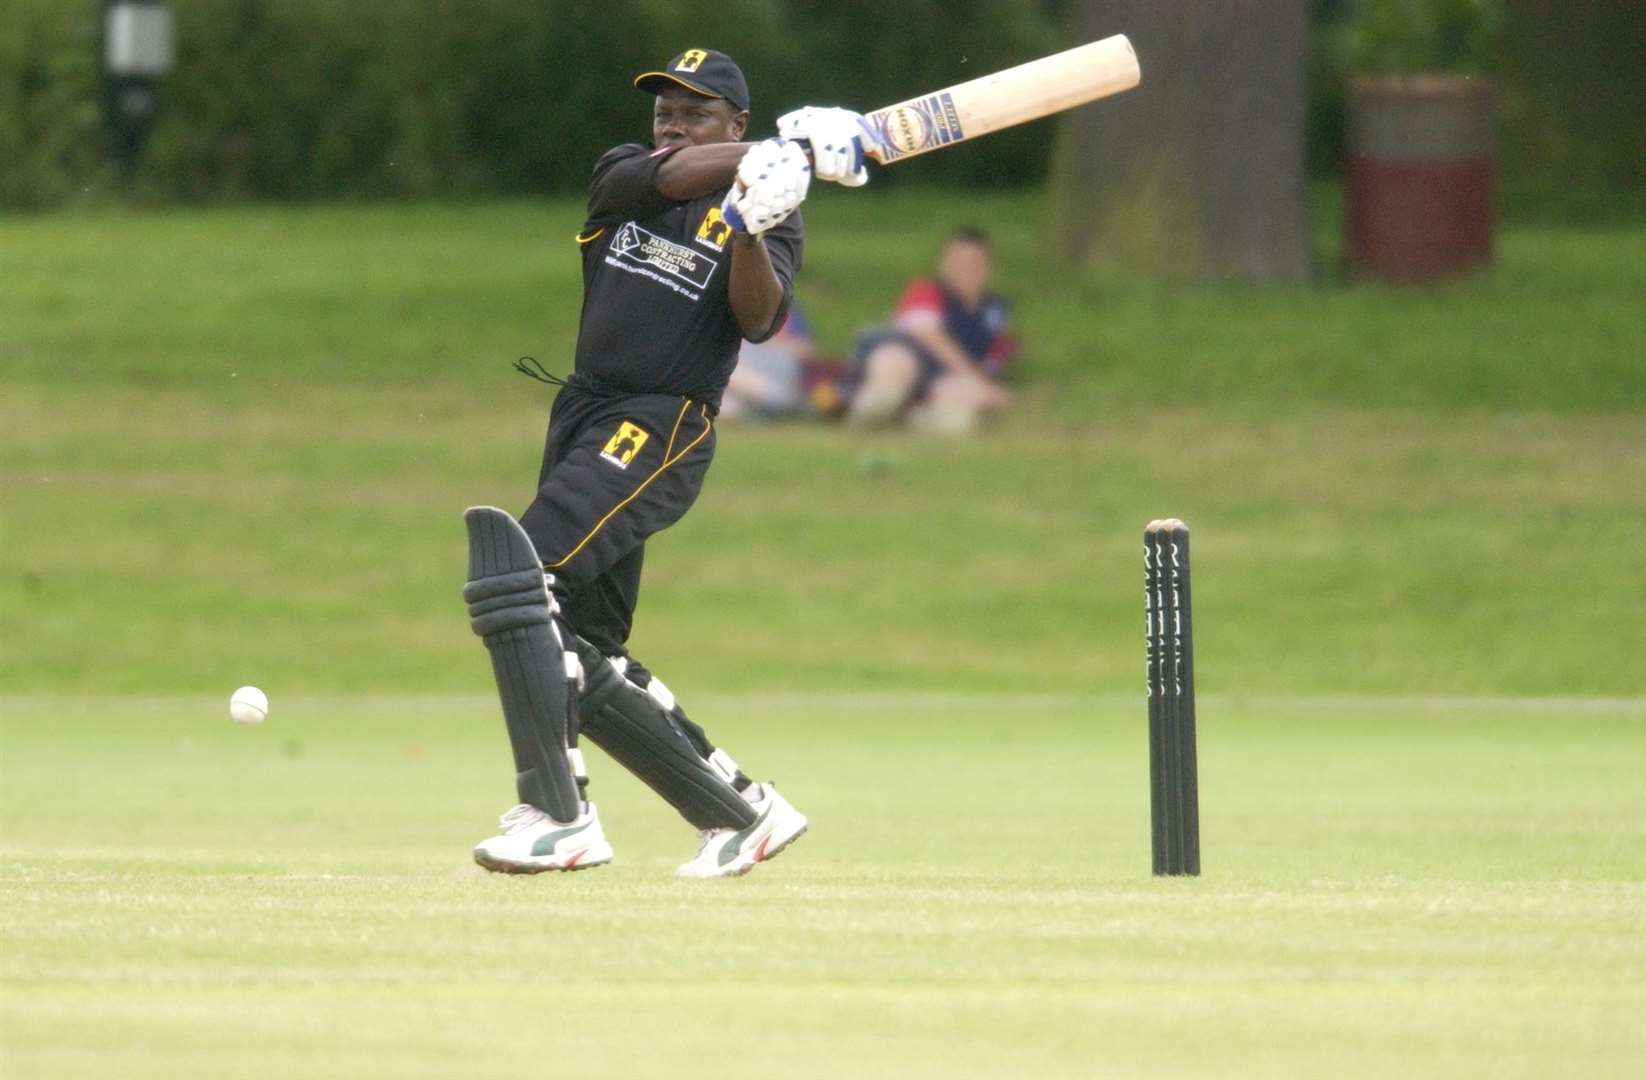 Richie Richardson shows off his skills for Lashings against the Royal Navy in 2004